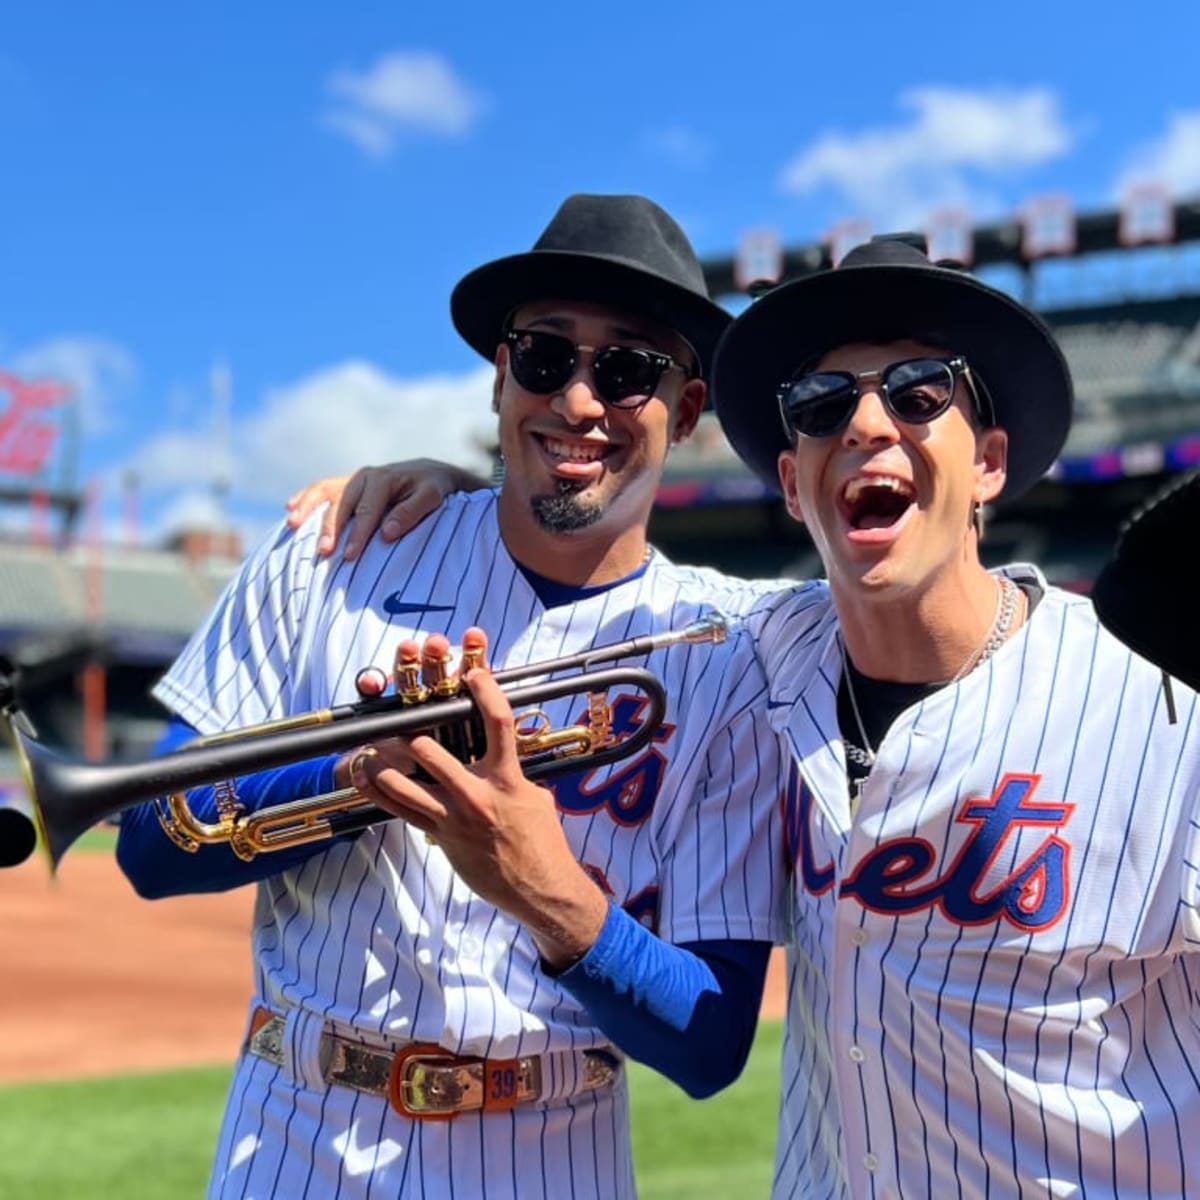 Watch Mets' Edwin Diaz enter to Timmy Trumpet's live performance